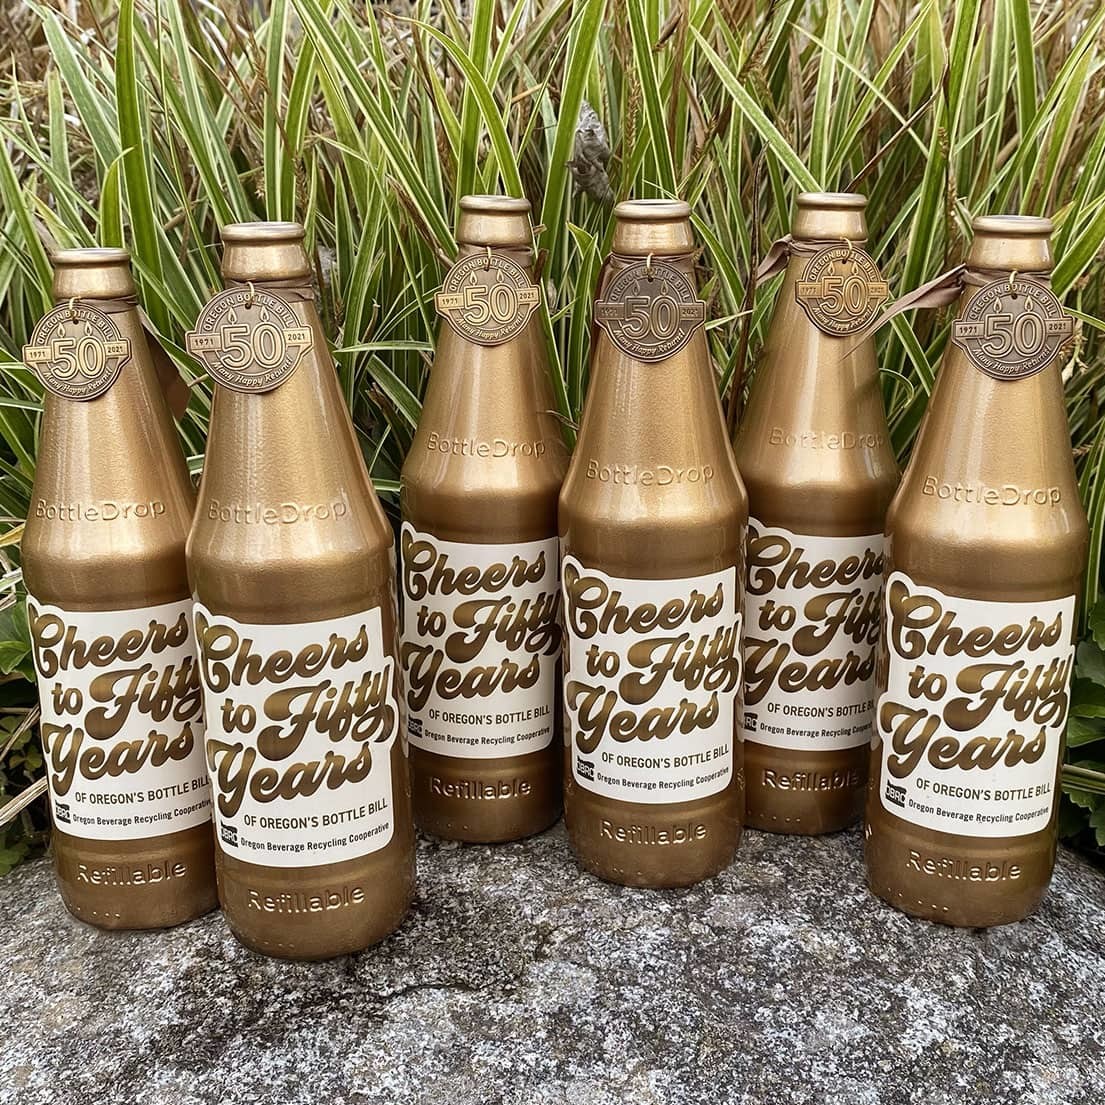 Five golden bottles for the OBRC 50th anniversary treasure hunt, photographed outdoors on a rock.